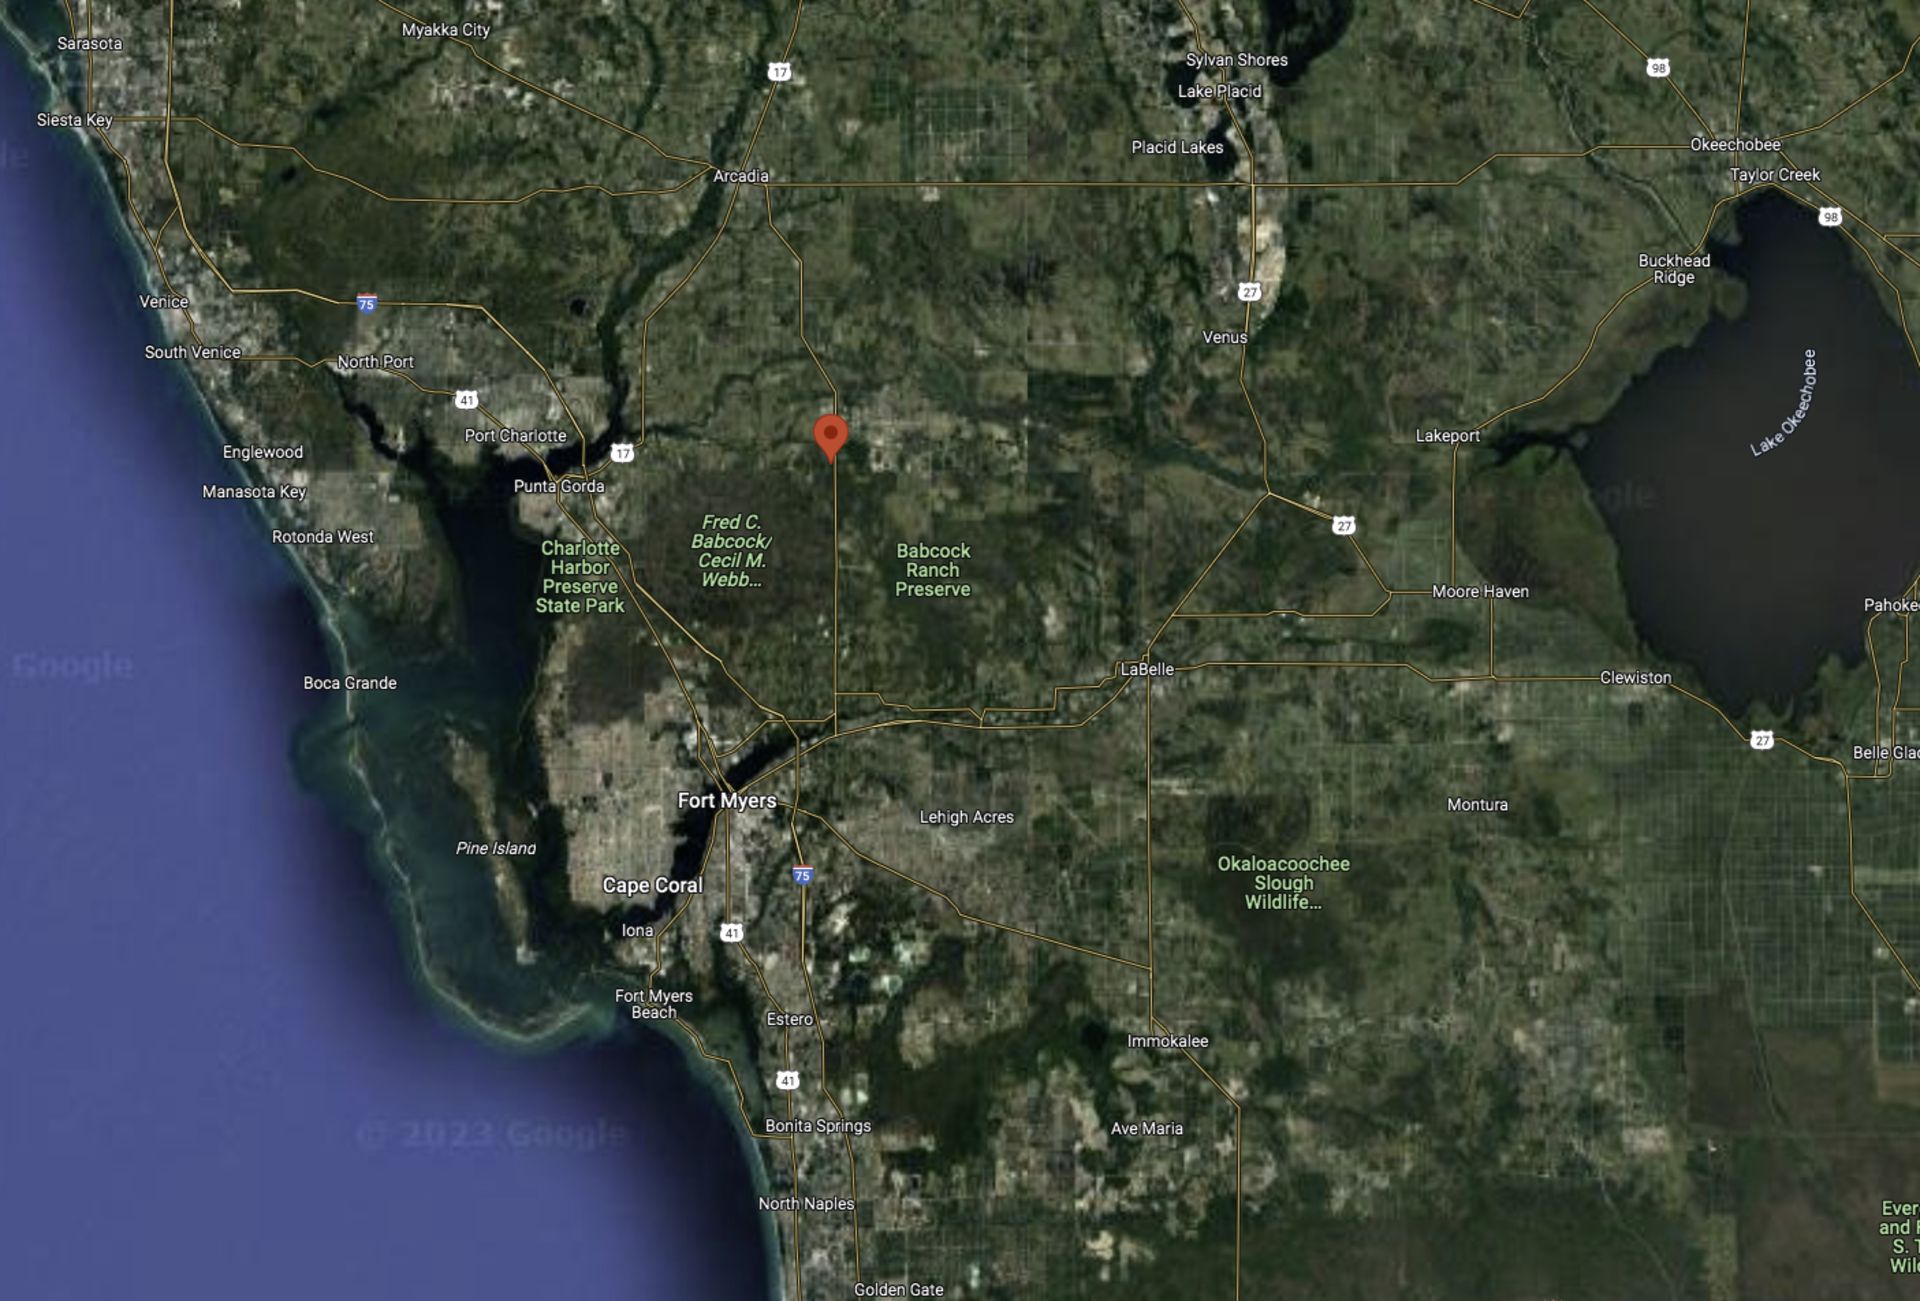 Claim This Slice of Charlotte County, Florida! - Image 13 of 14